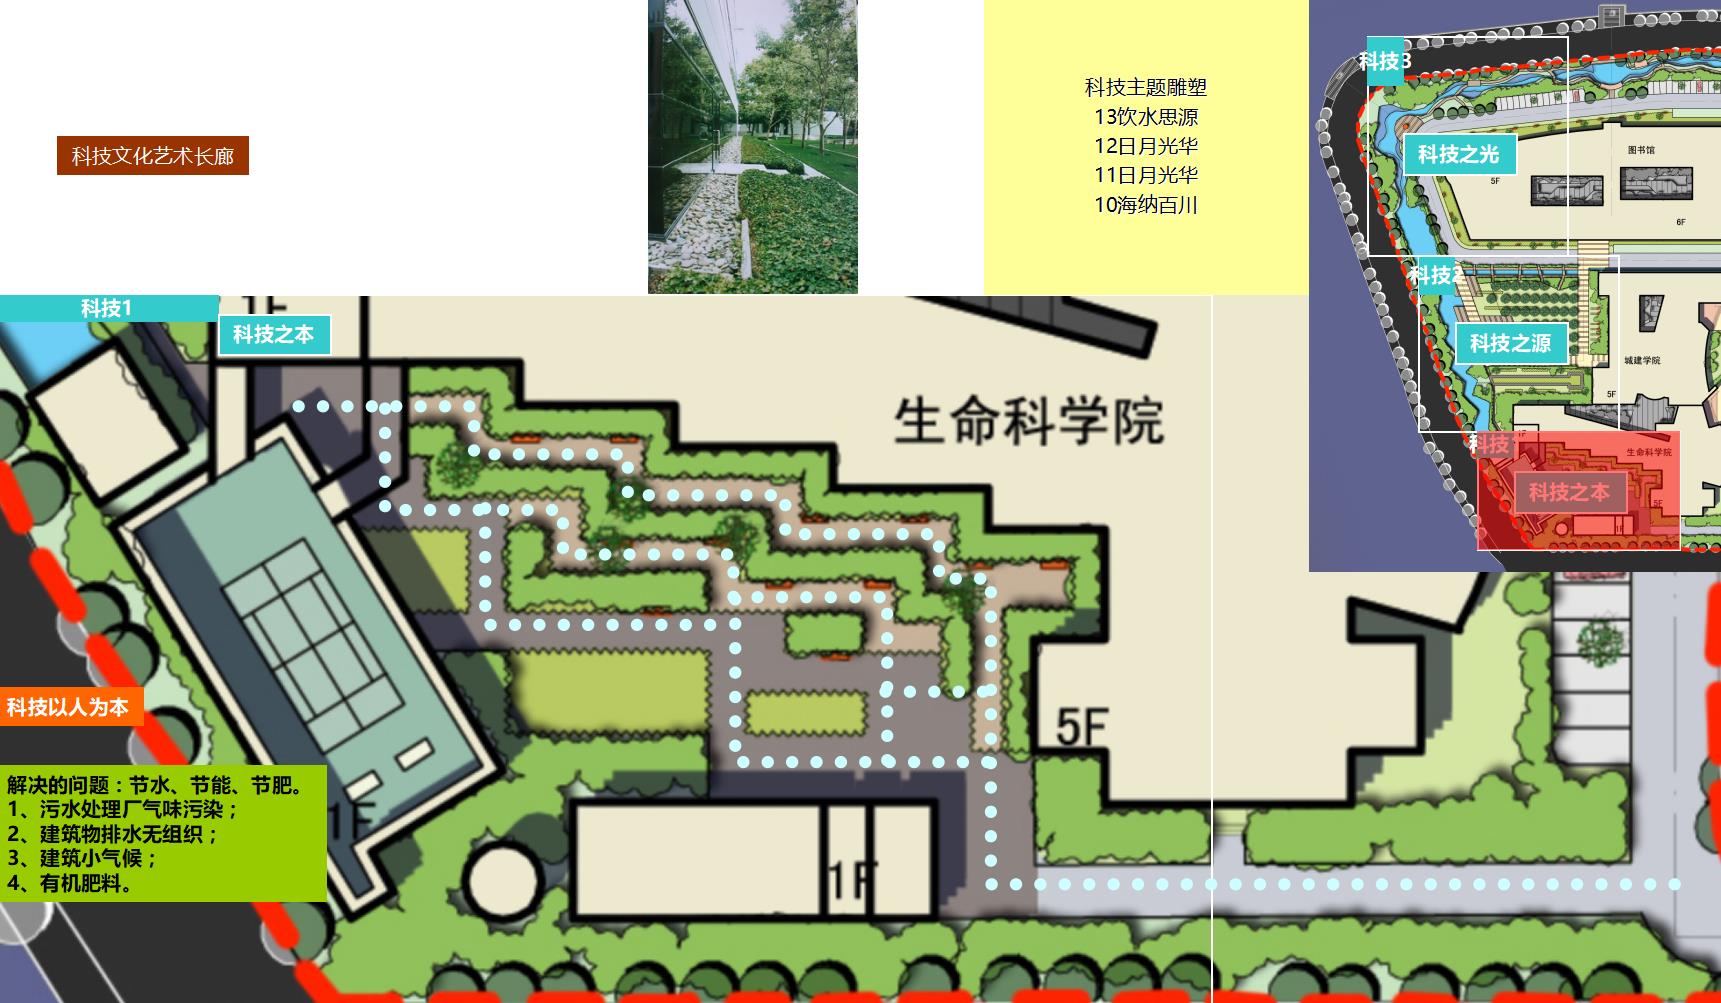 Landscape planning and design of the West Campus of Central South Branch of Wuhan University of science and technology(图6)